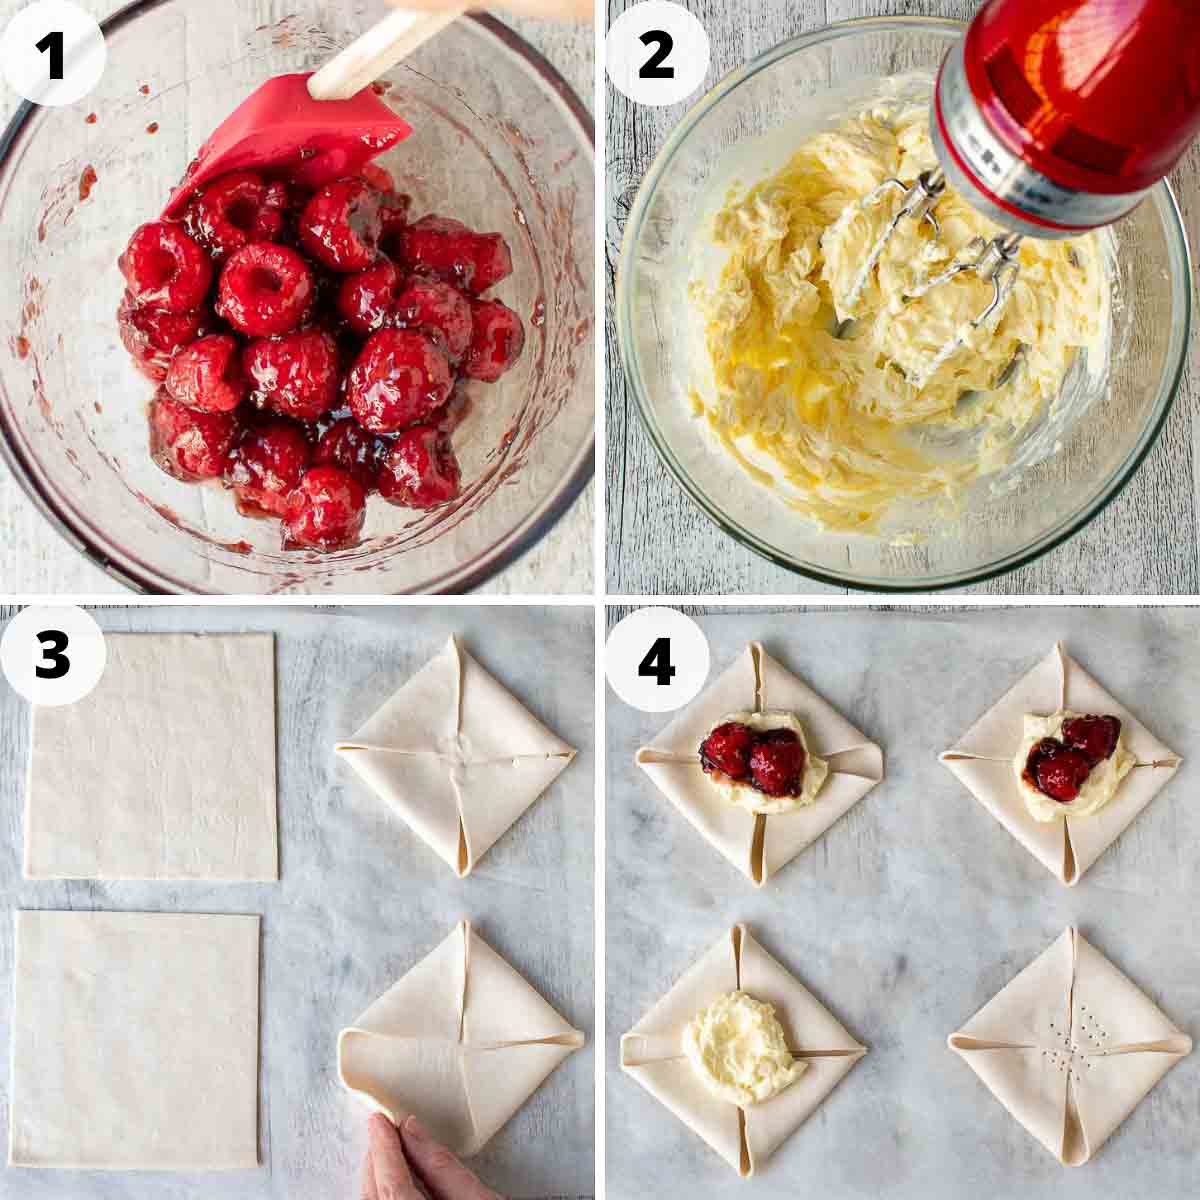 Four step process images showing to make this dessert recipe.